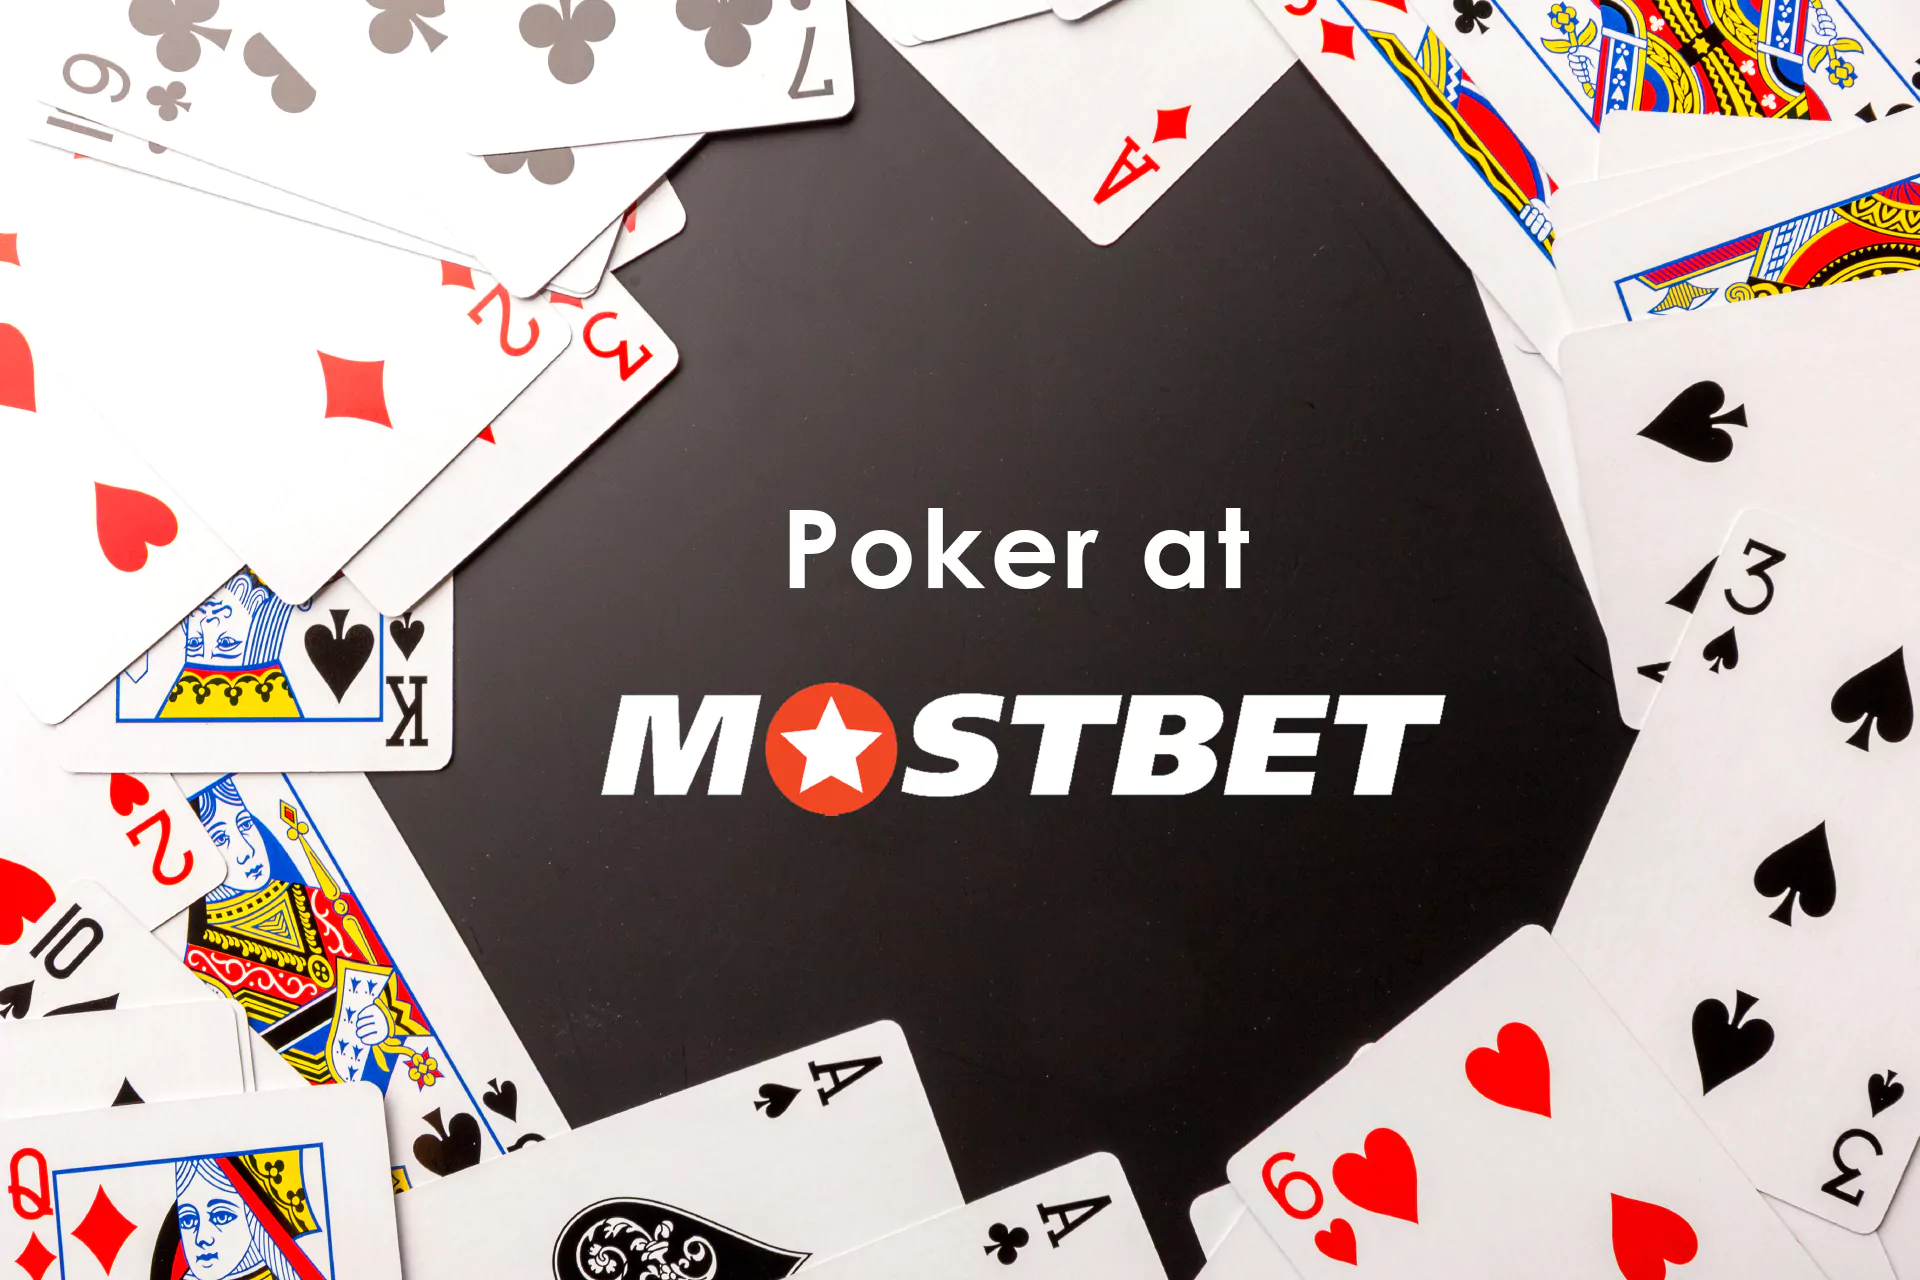 There is a special section of Poker in Mostbet casino.